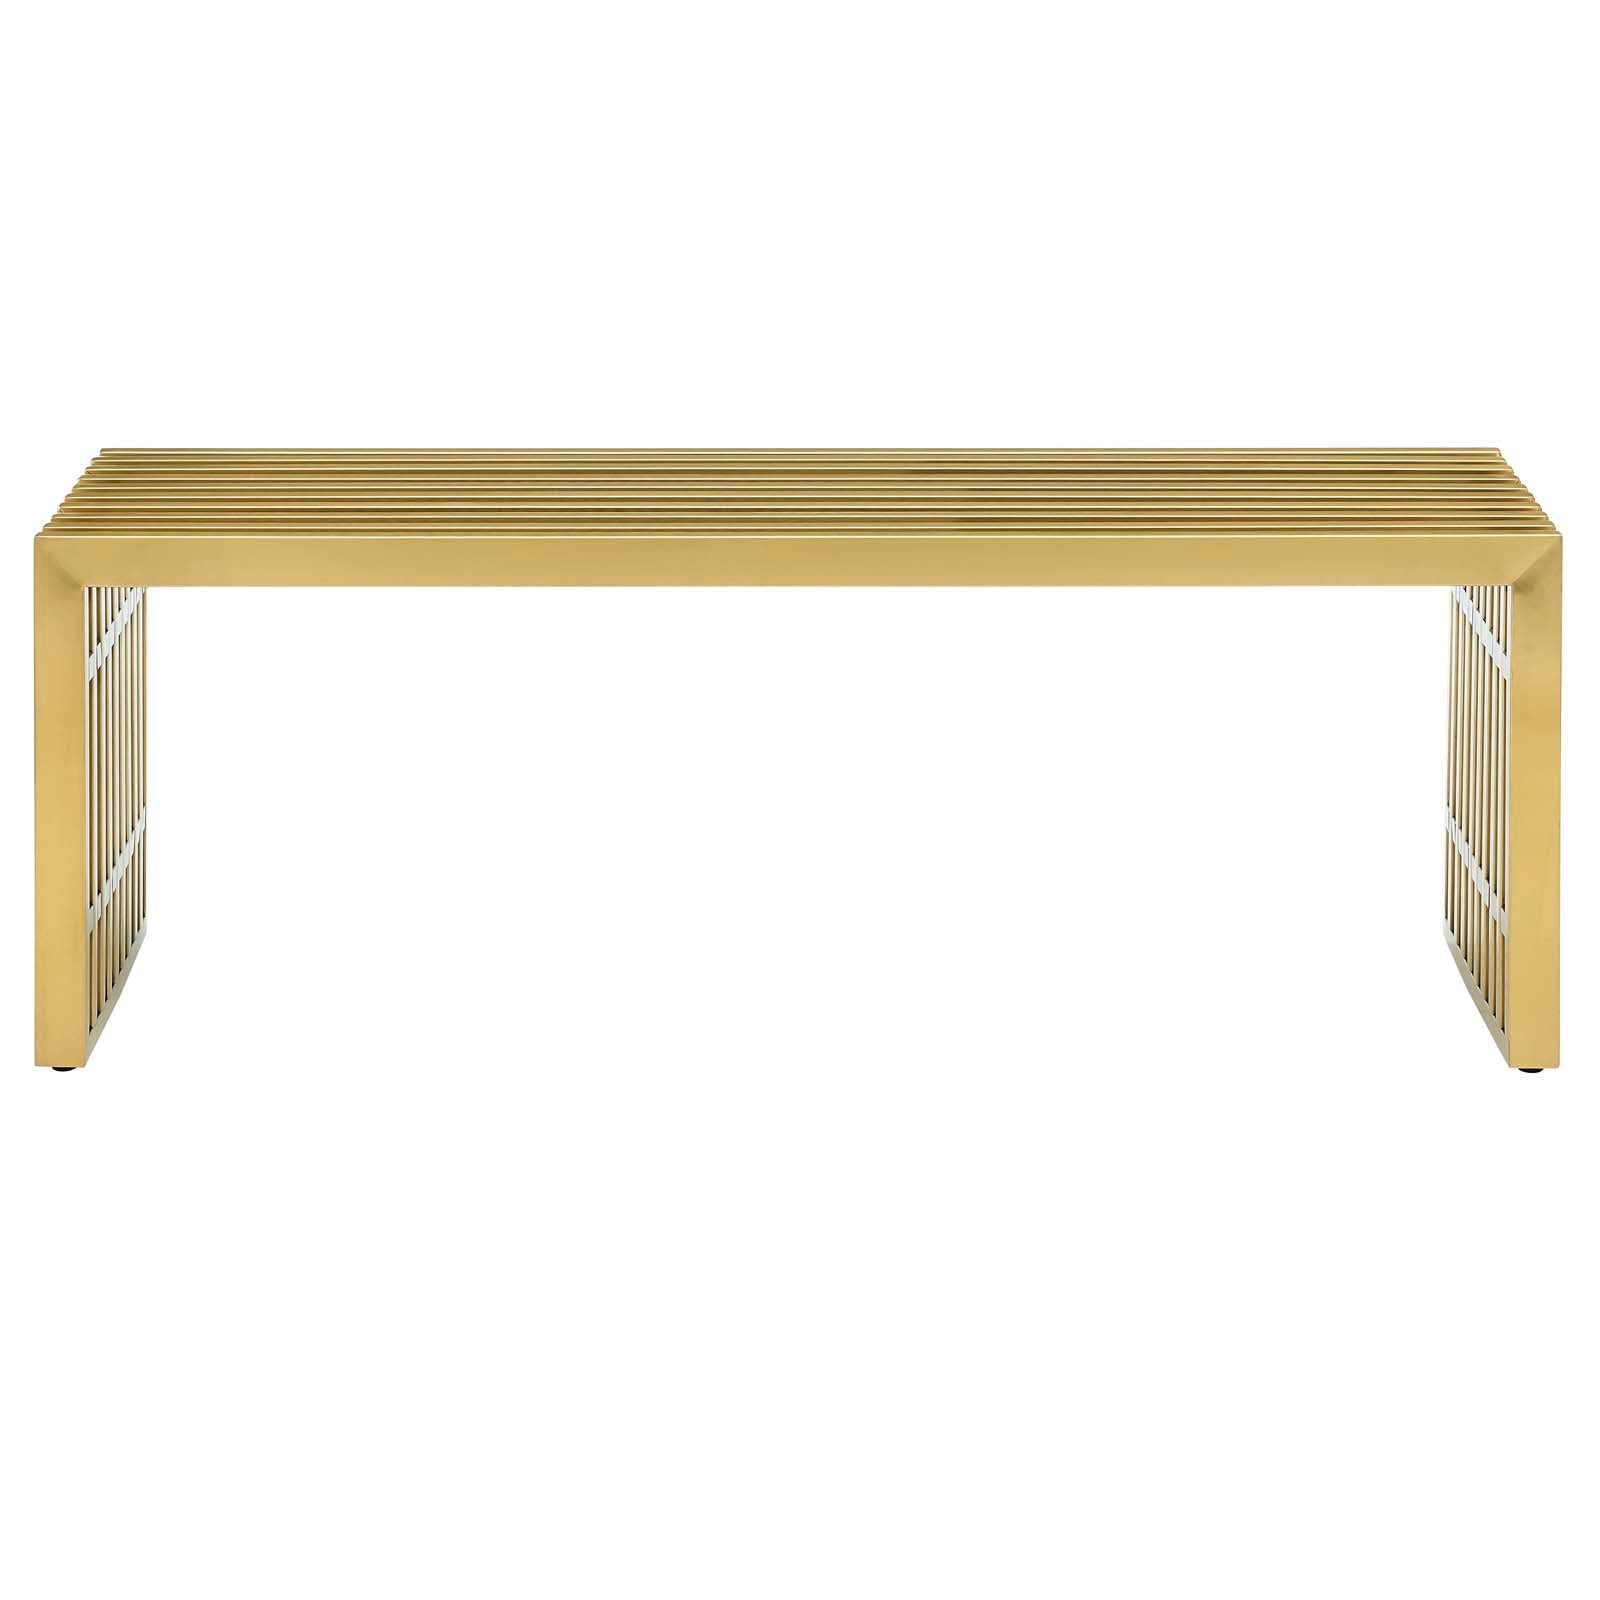 Modway Benches - Gridiron Medium Stainless Steel Bench Gold